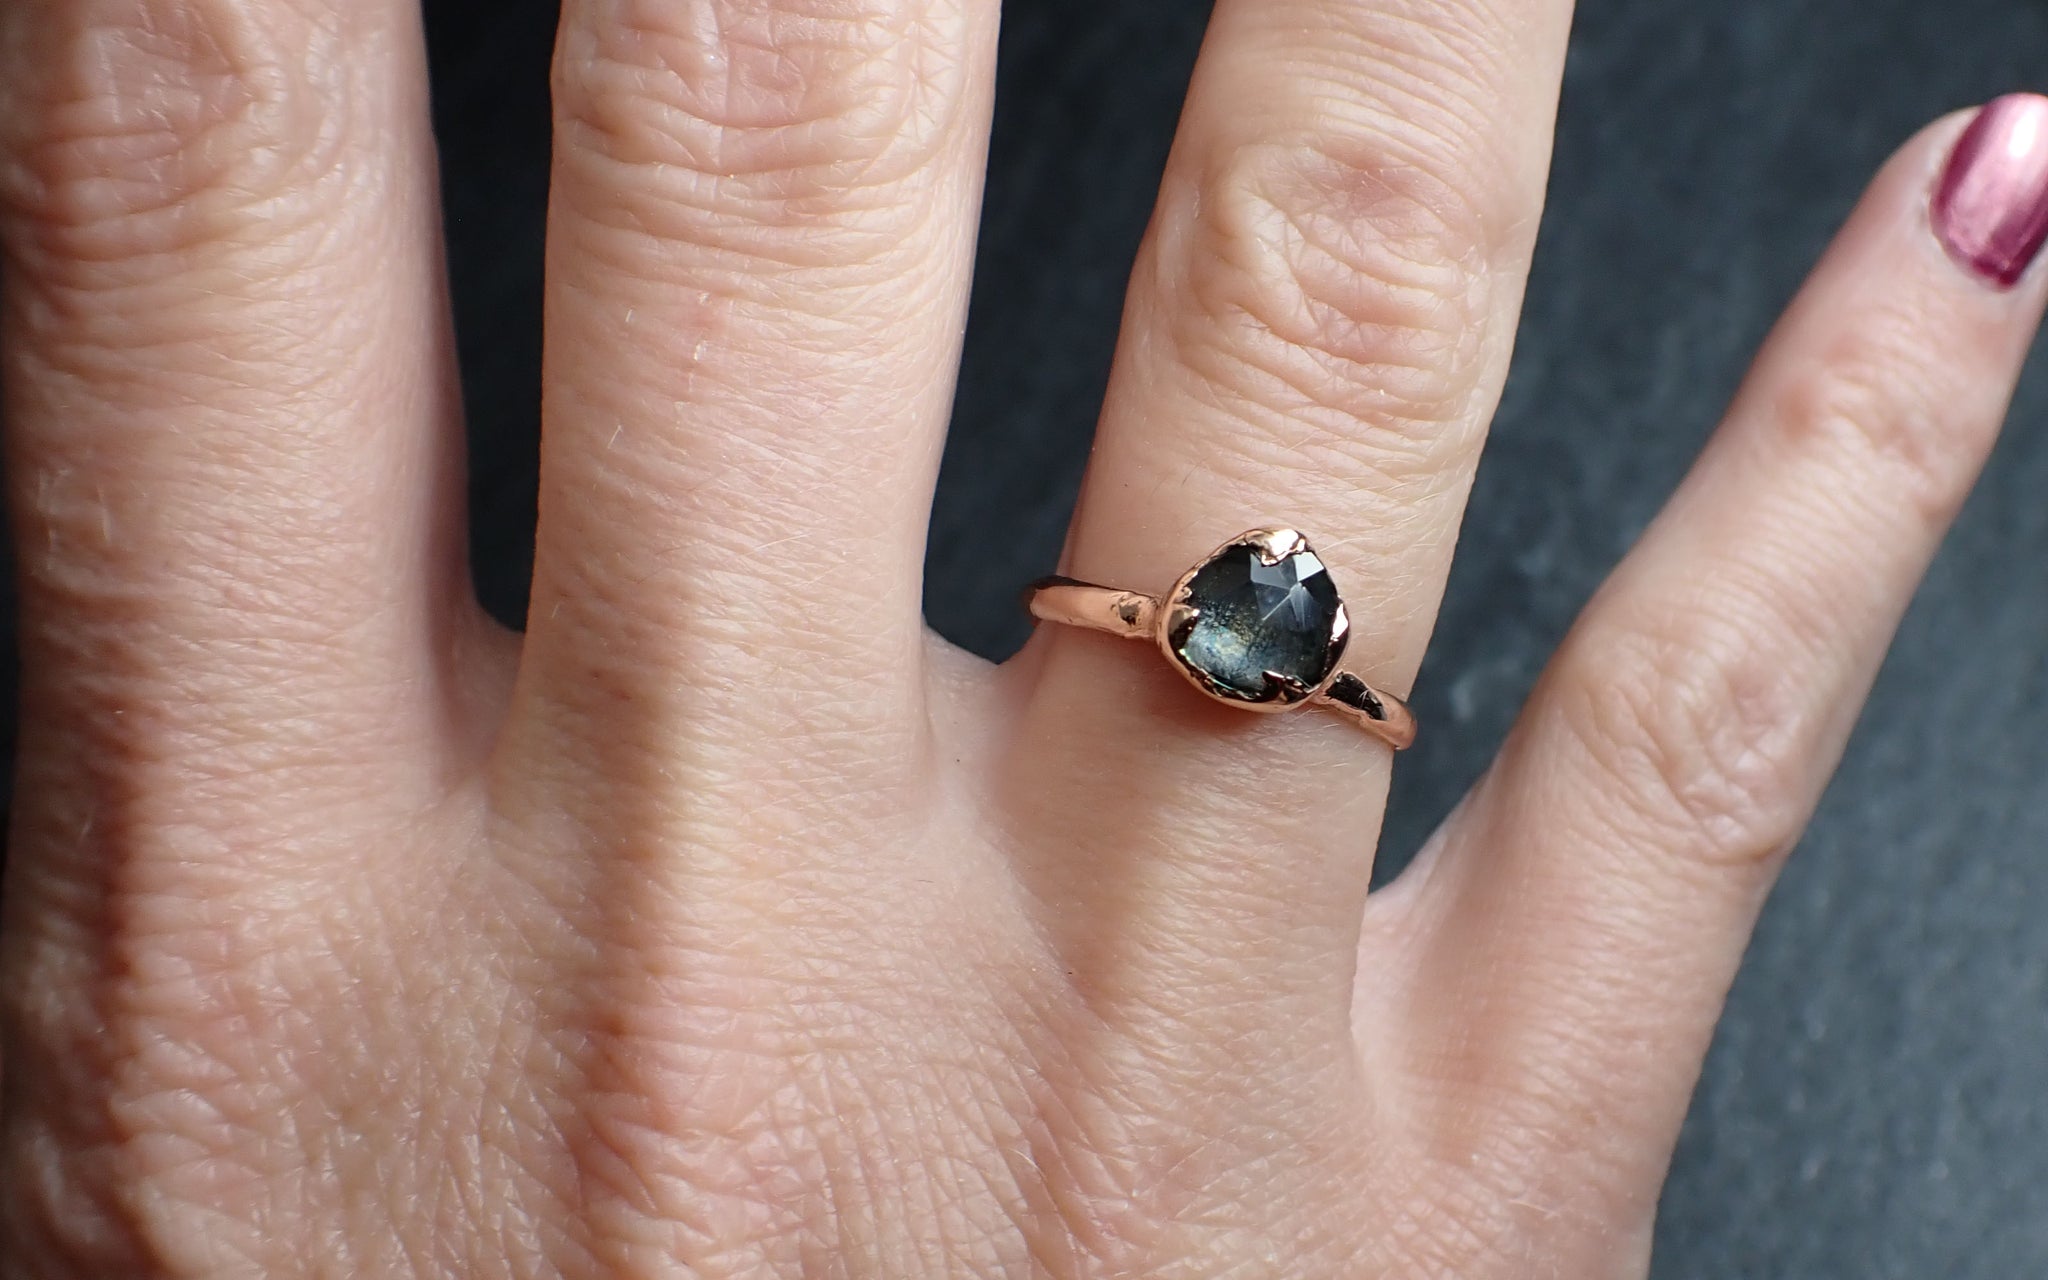 fancy cut montana blue sapphire 14k rose gold solitaire ring gold gemstone engagement ring 2631 Alternative Engagement